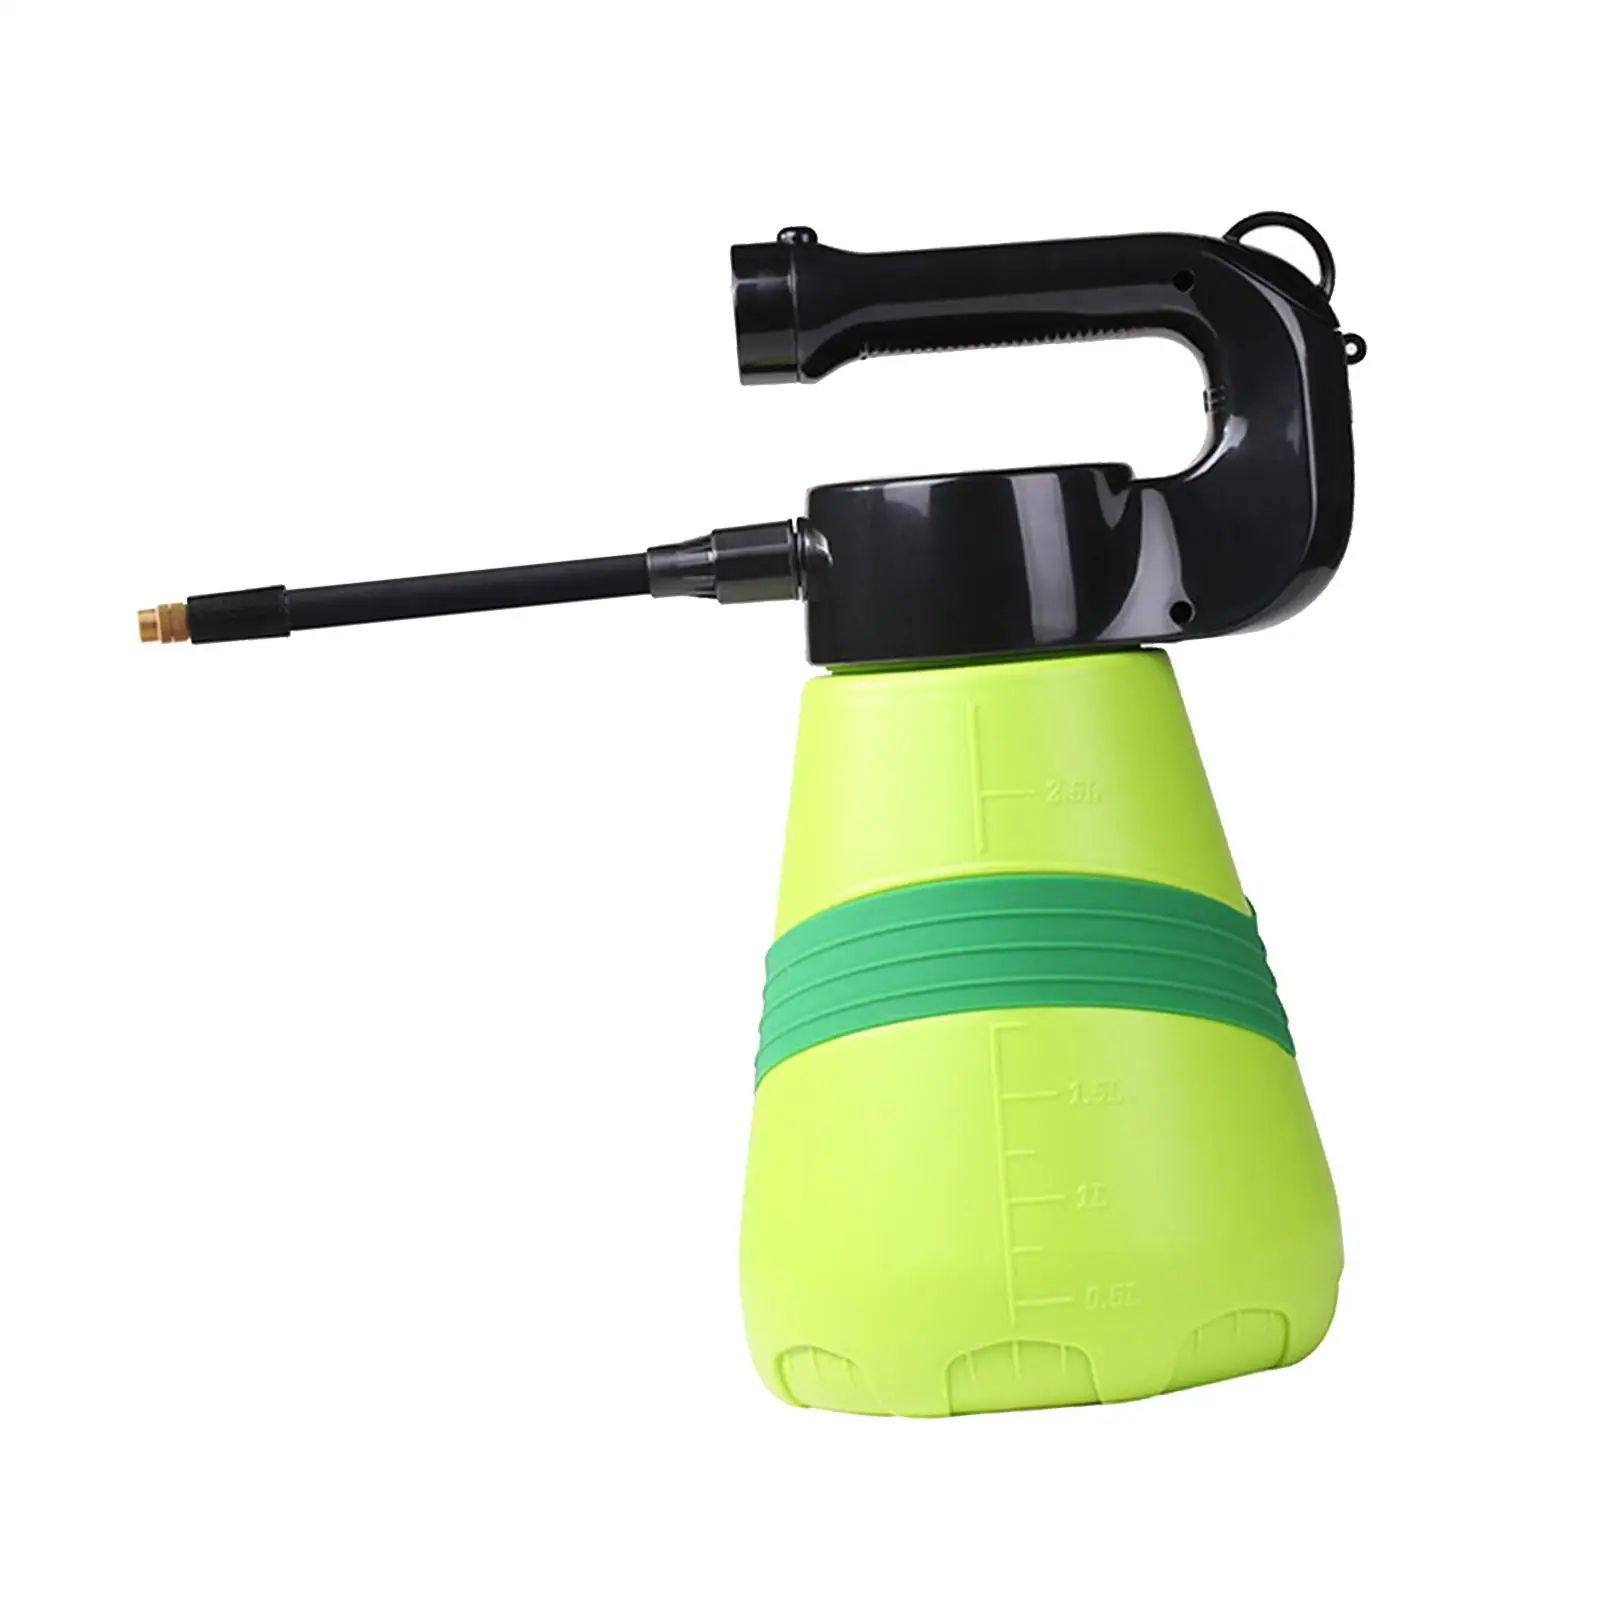 3L Electric Planter Sprayer Flower Watering Bottle Household Cleaning USB Rechargeable Garden Watering Mist Sprayer for Lawn